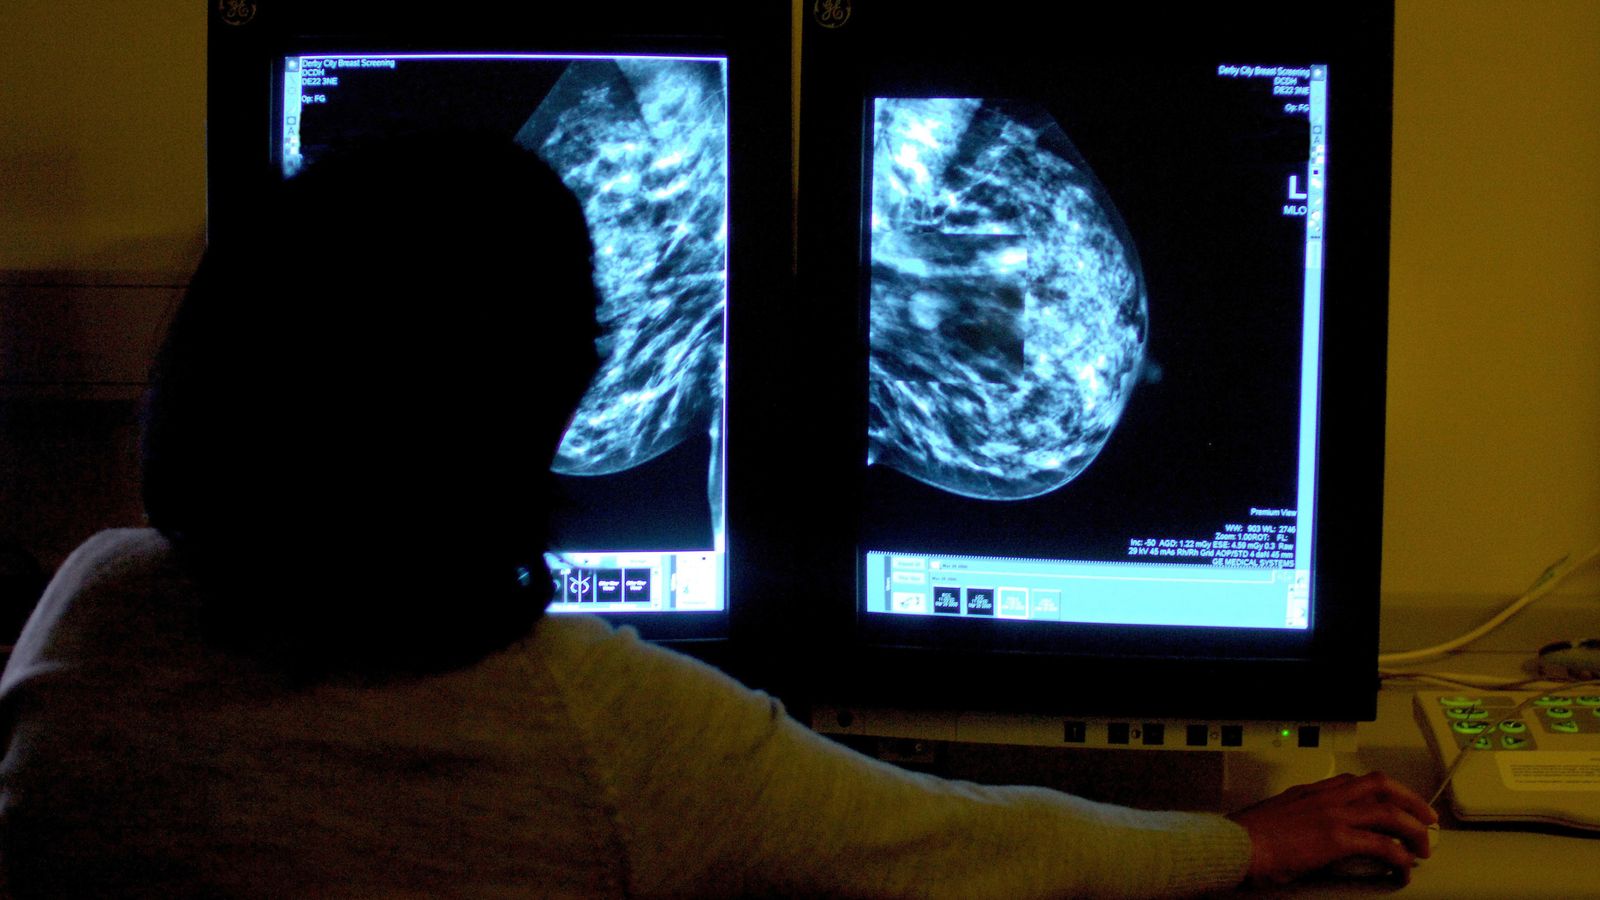 Project launched to bust myth breast cancer is 'white person's disease'